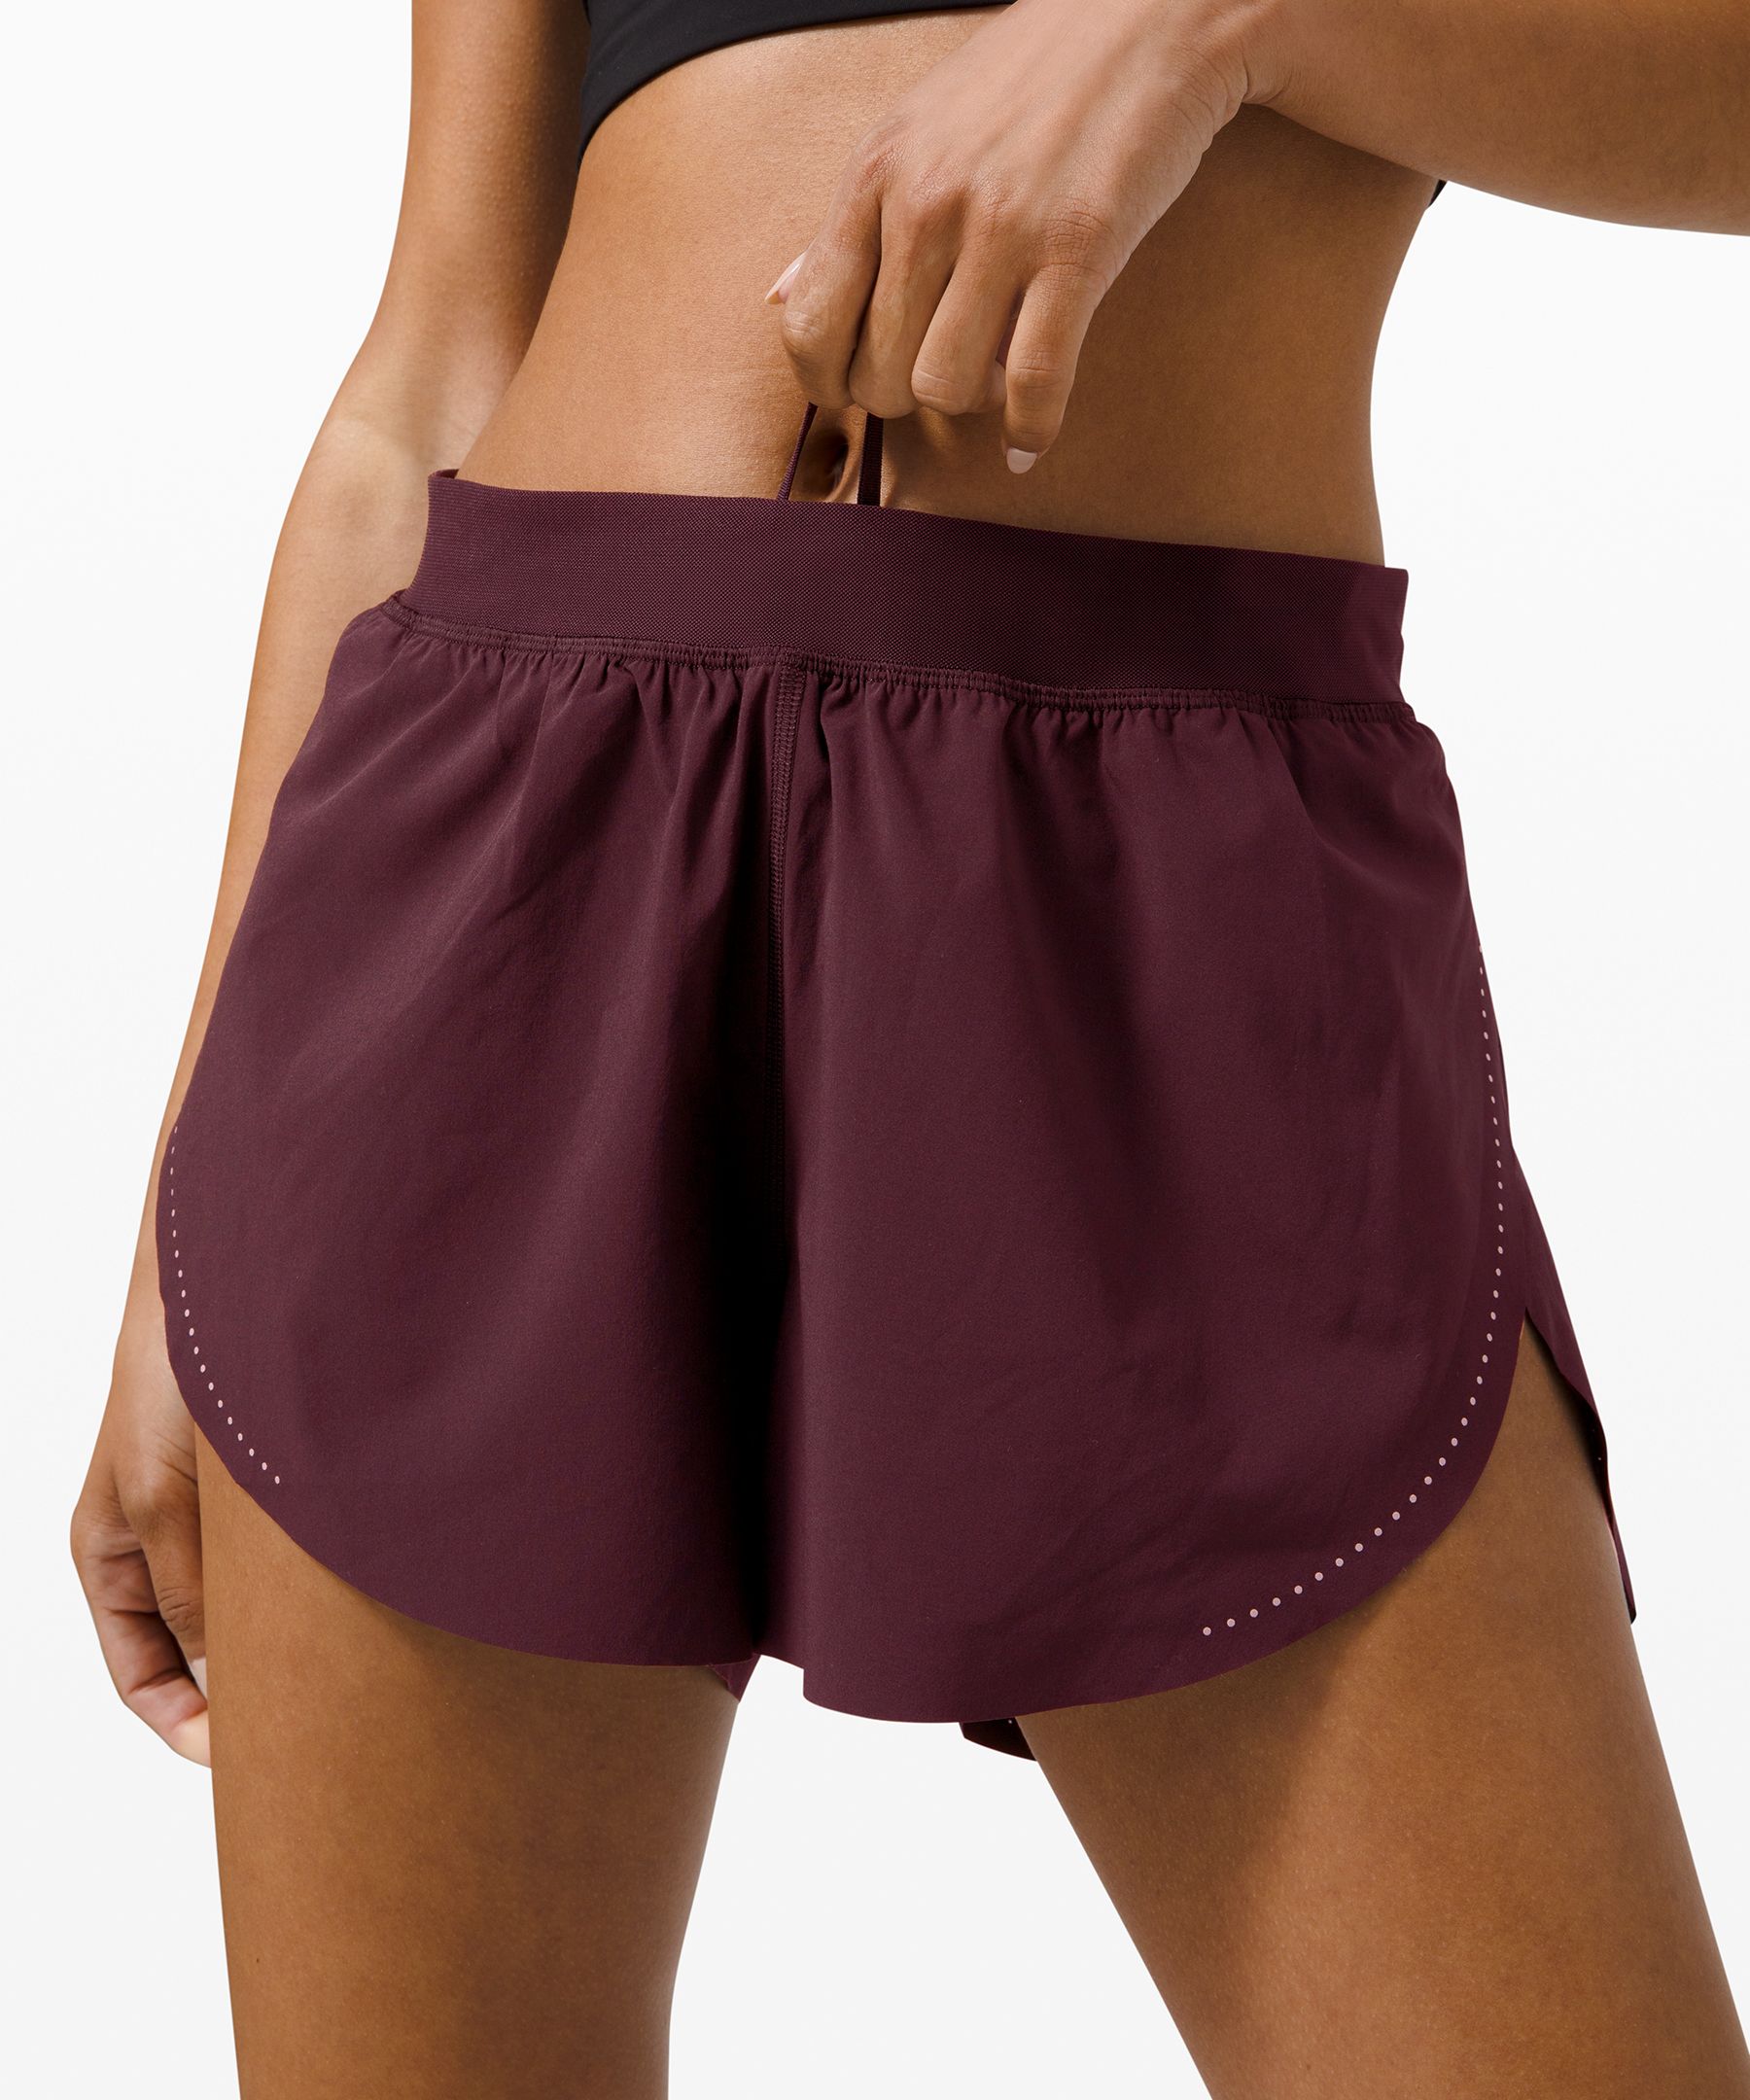 When Will Lululemon Restock Find Your Pace Shorts